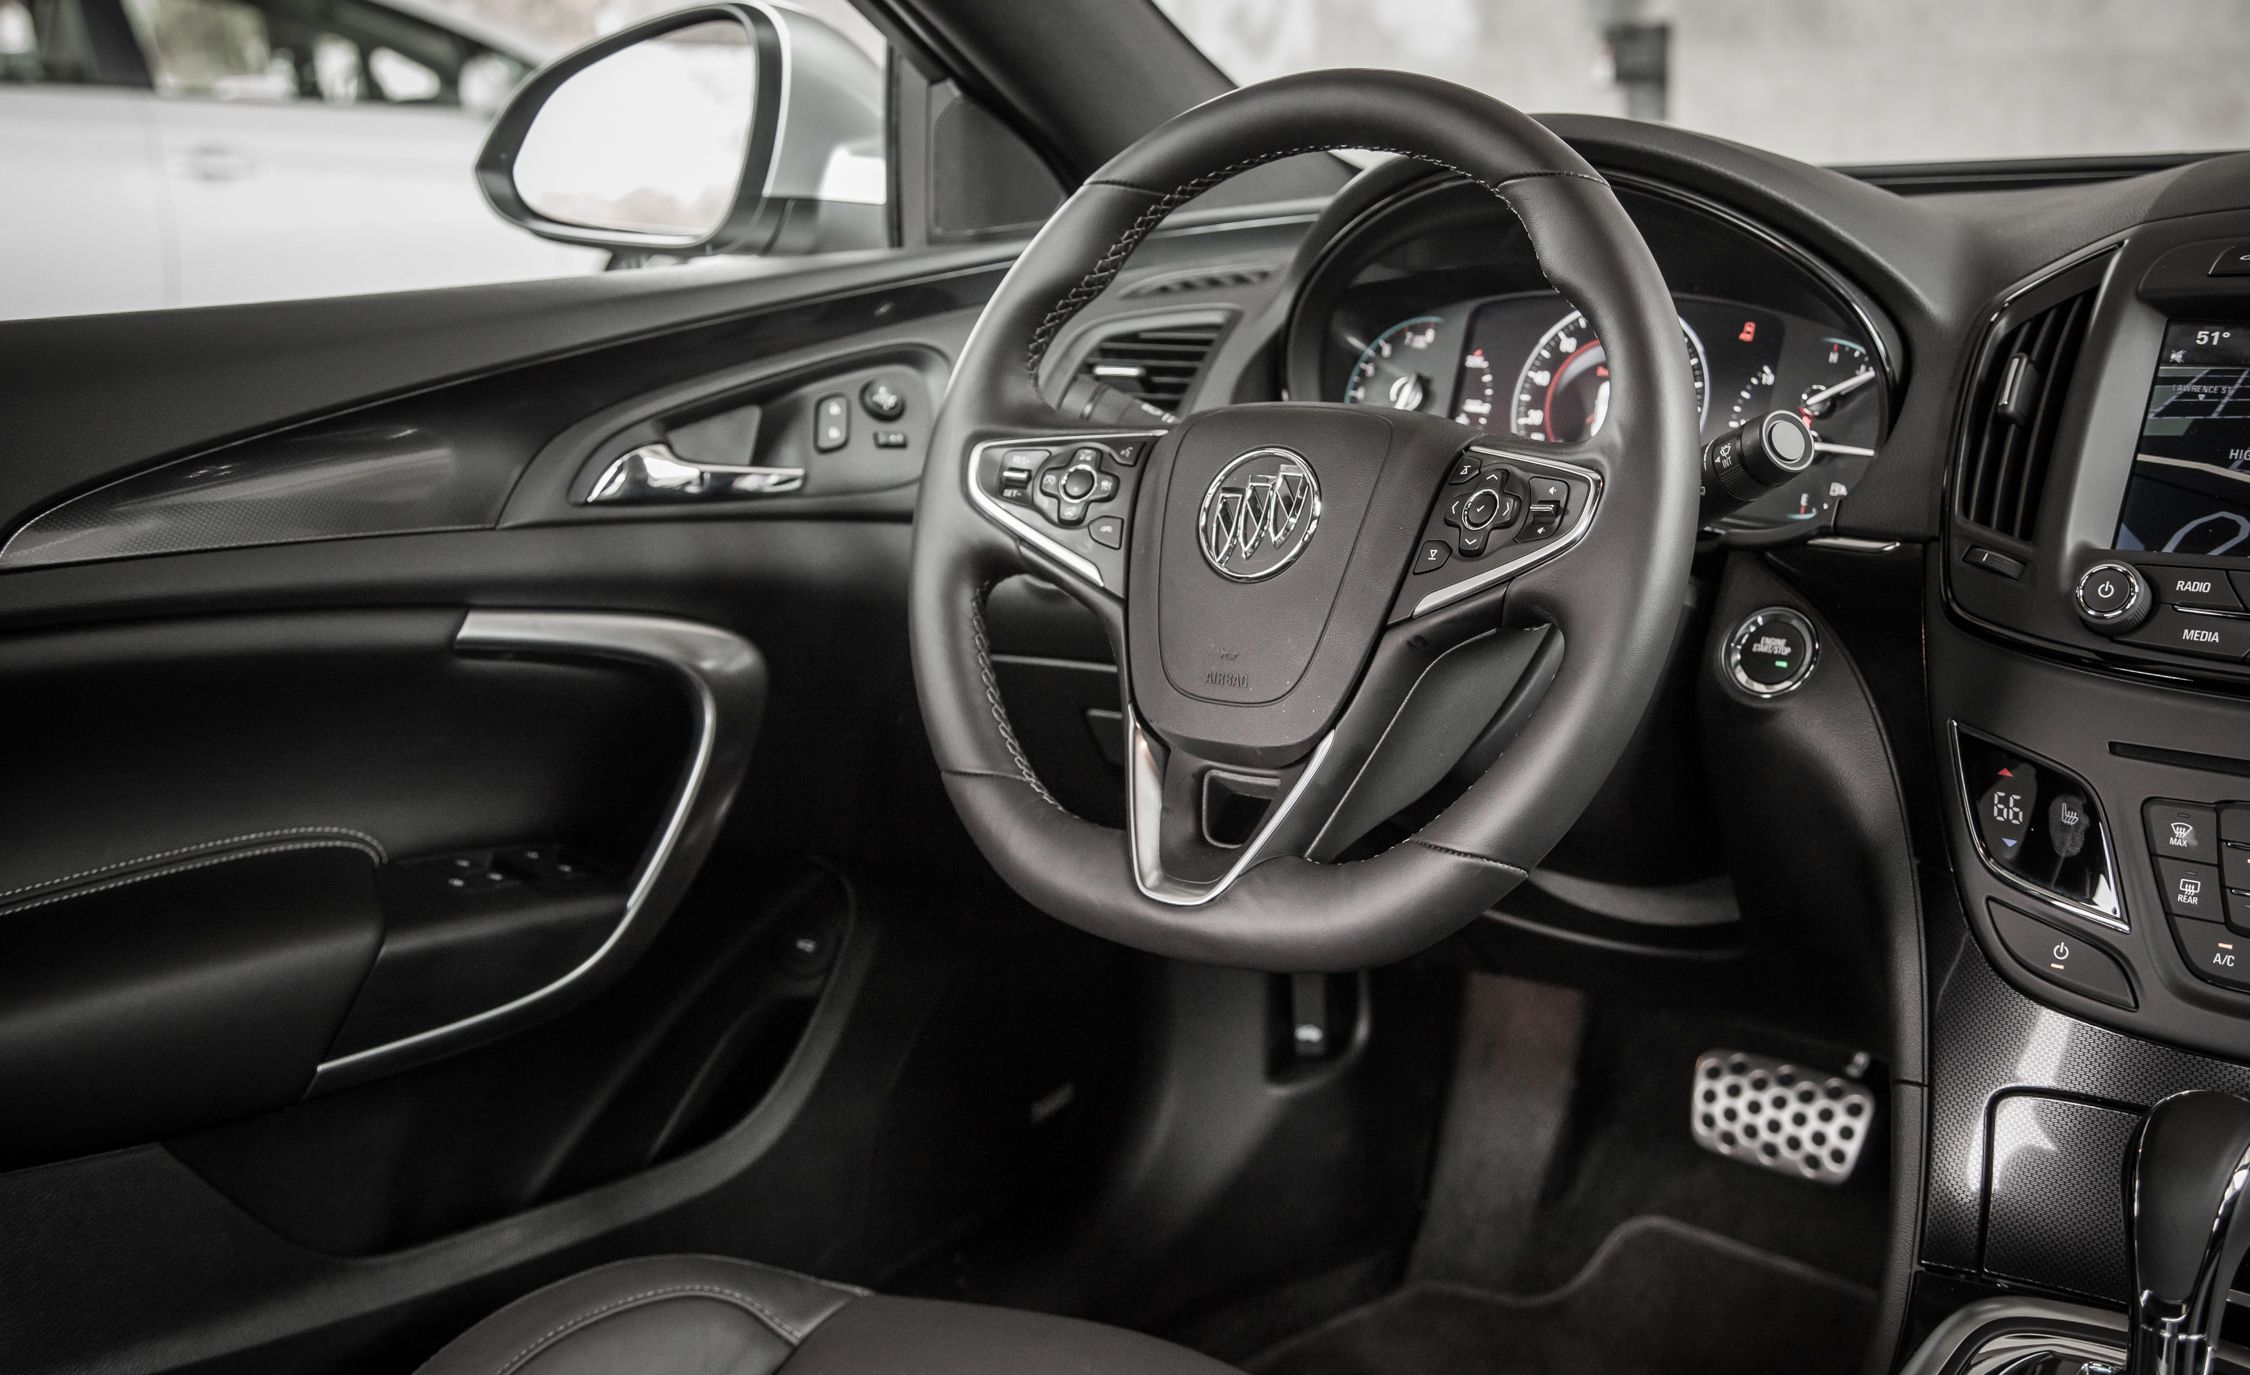 2014 Buick Regal Gs Interior (View 9 of 30)